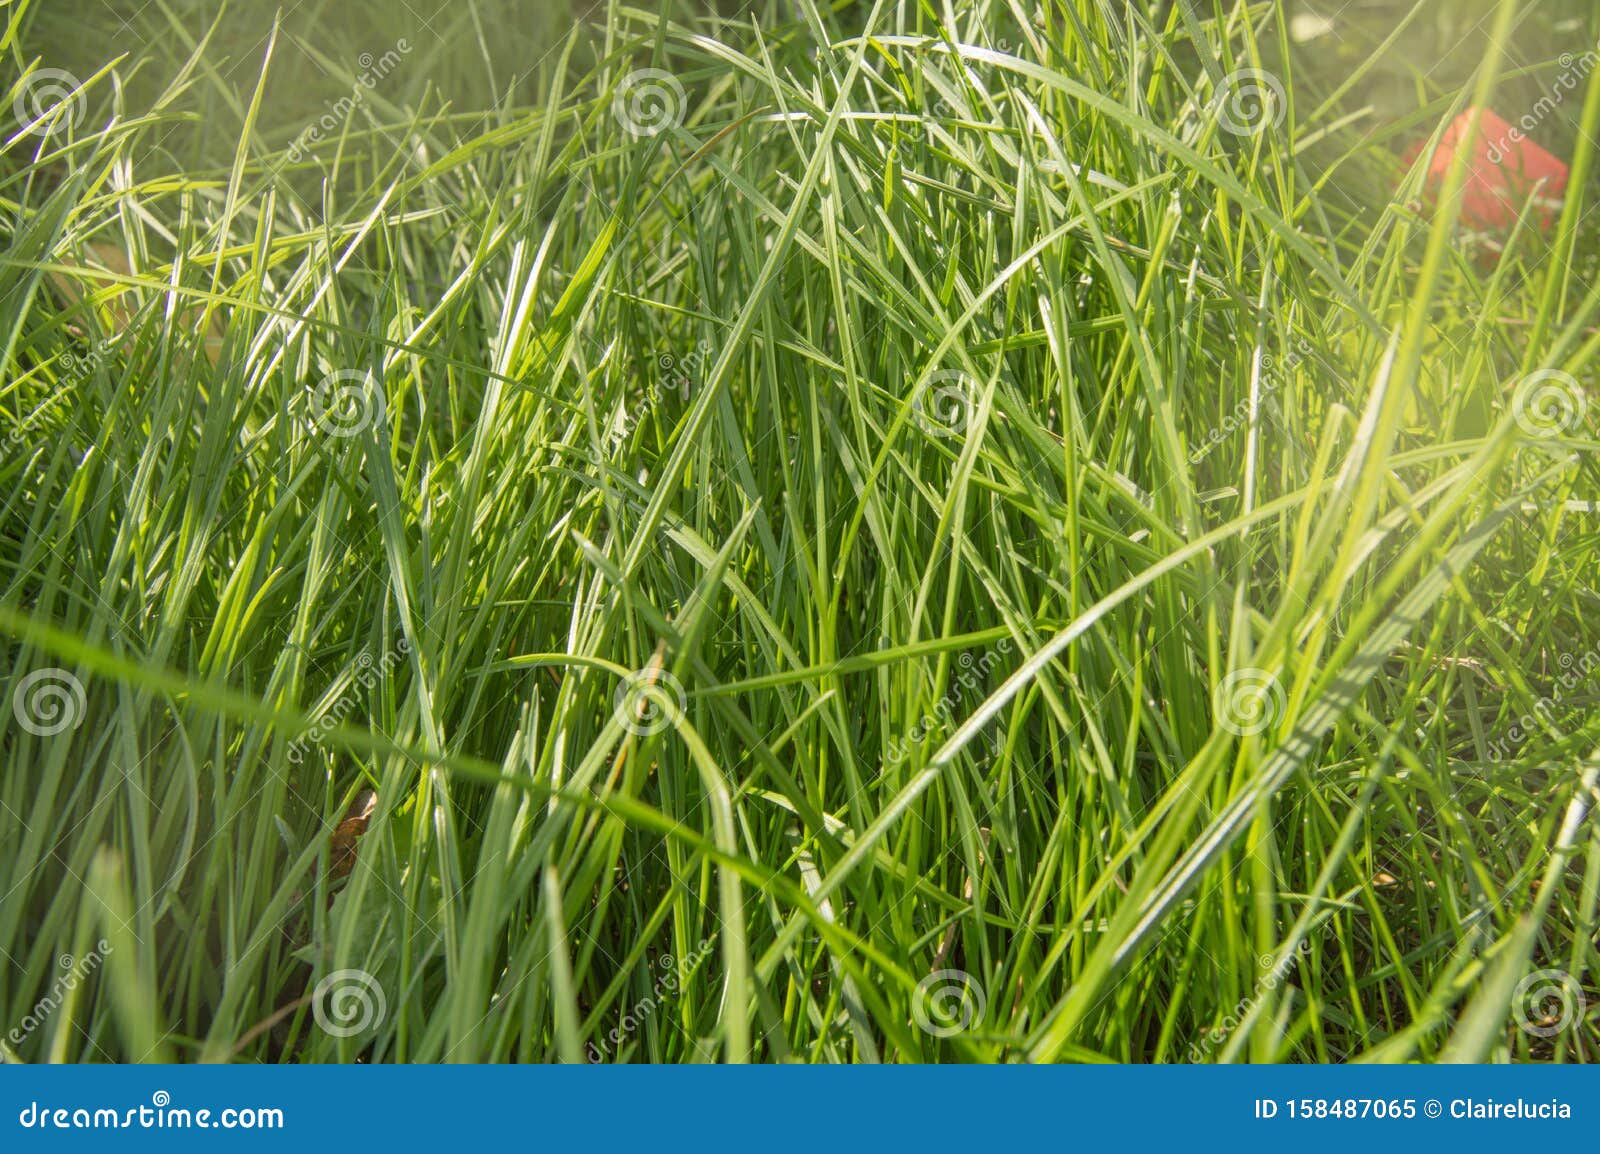 Fresh Young Green Summer Grass and Sunlight, Natural Background Stock